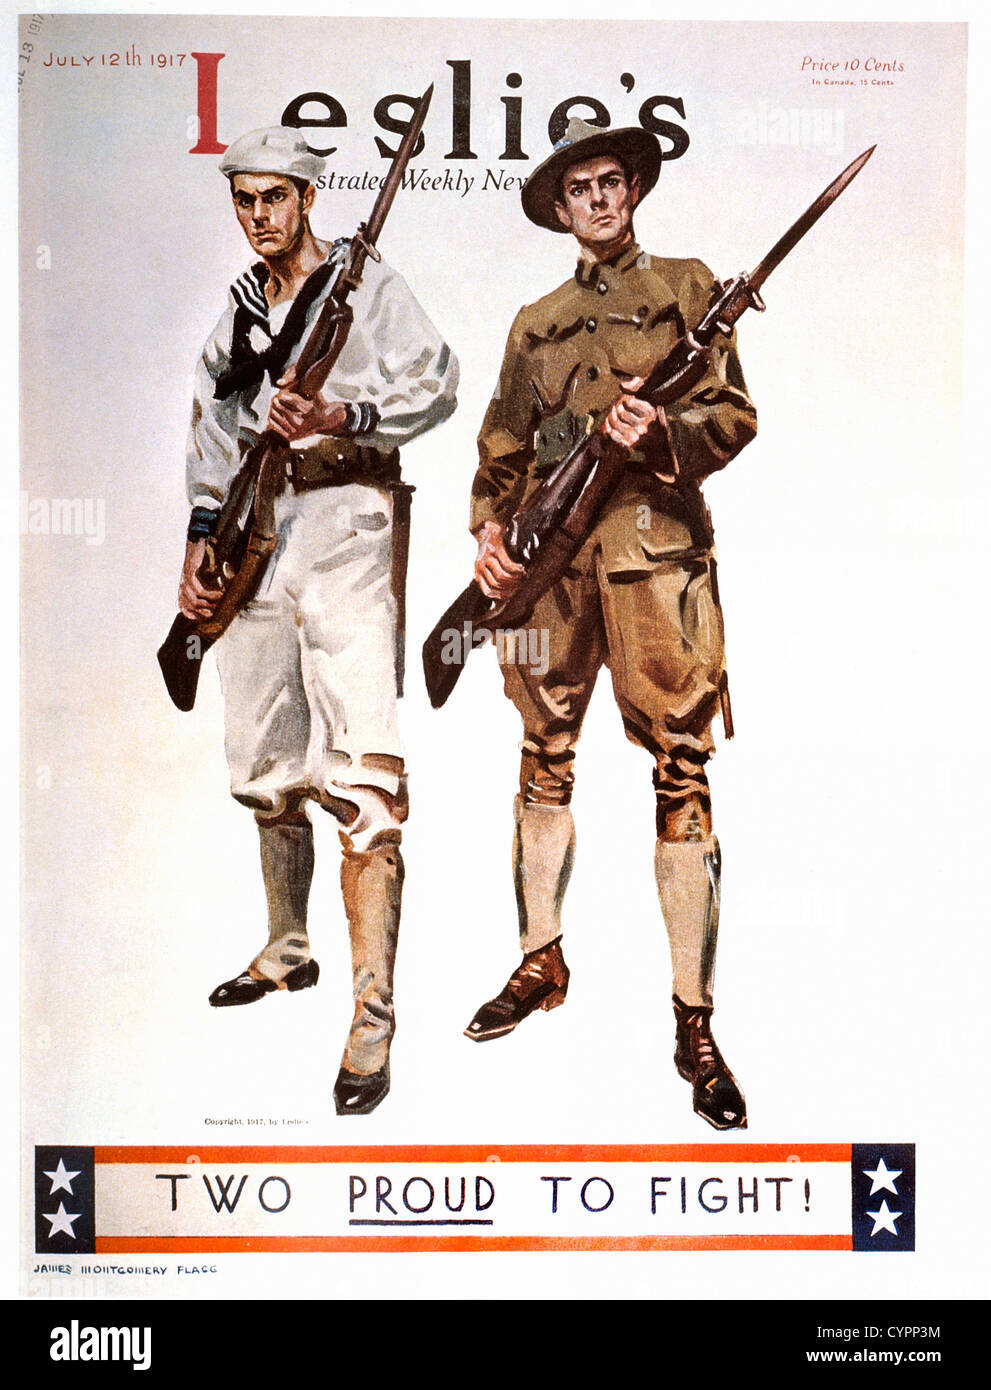 Two Proud to Fight!, Cover of Leslie's Illustrated Weekly News, July 12, 1917 Stock Photo